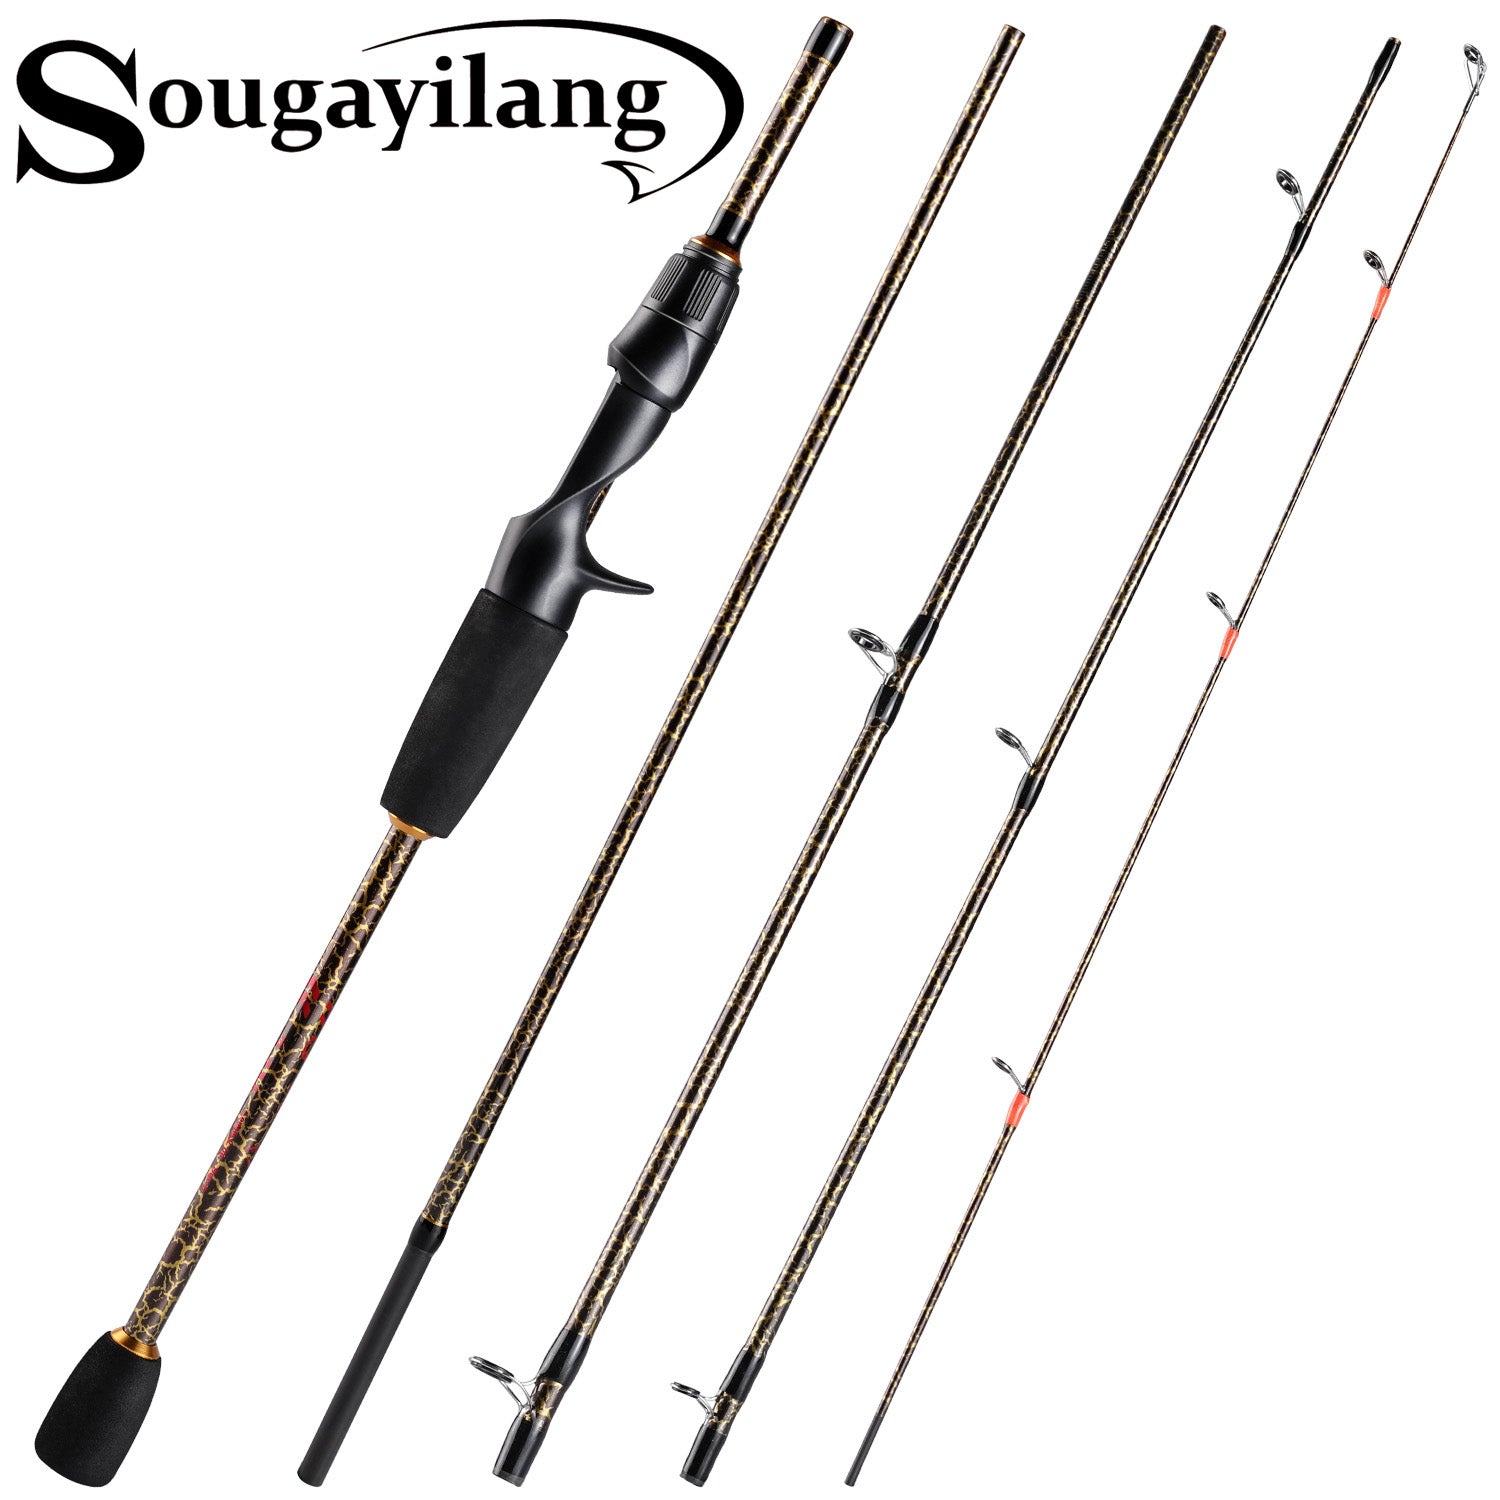 Sougayilang Fishing Rod Spinning/Casting Rod M Power 2 Sections For  Saltwater/Freshwater Pancing